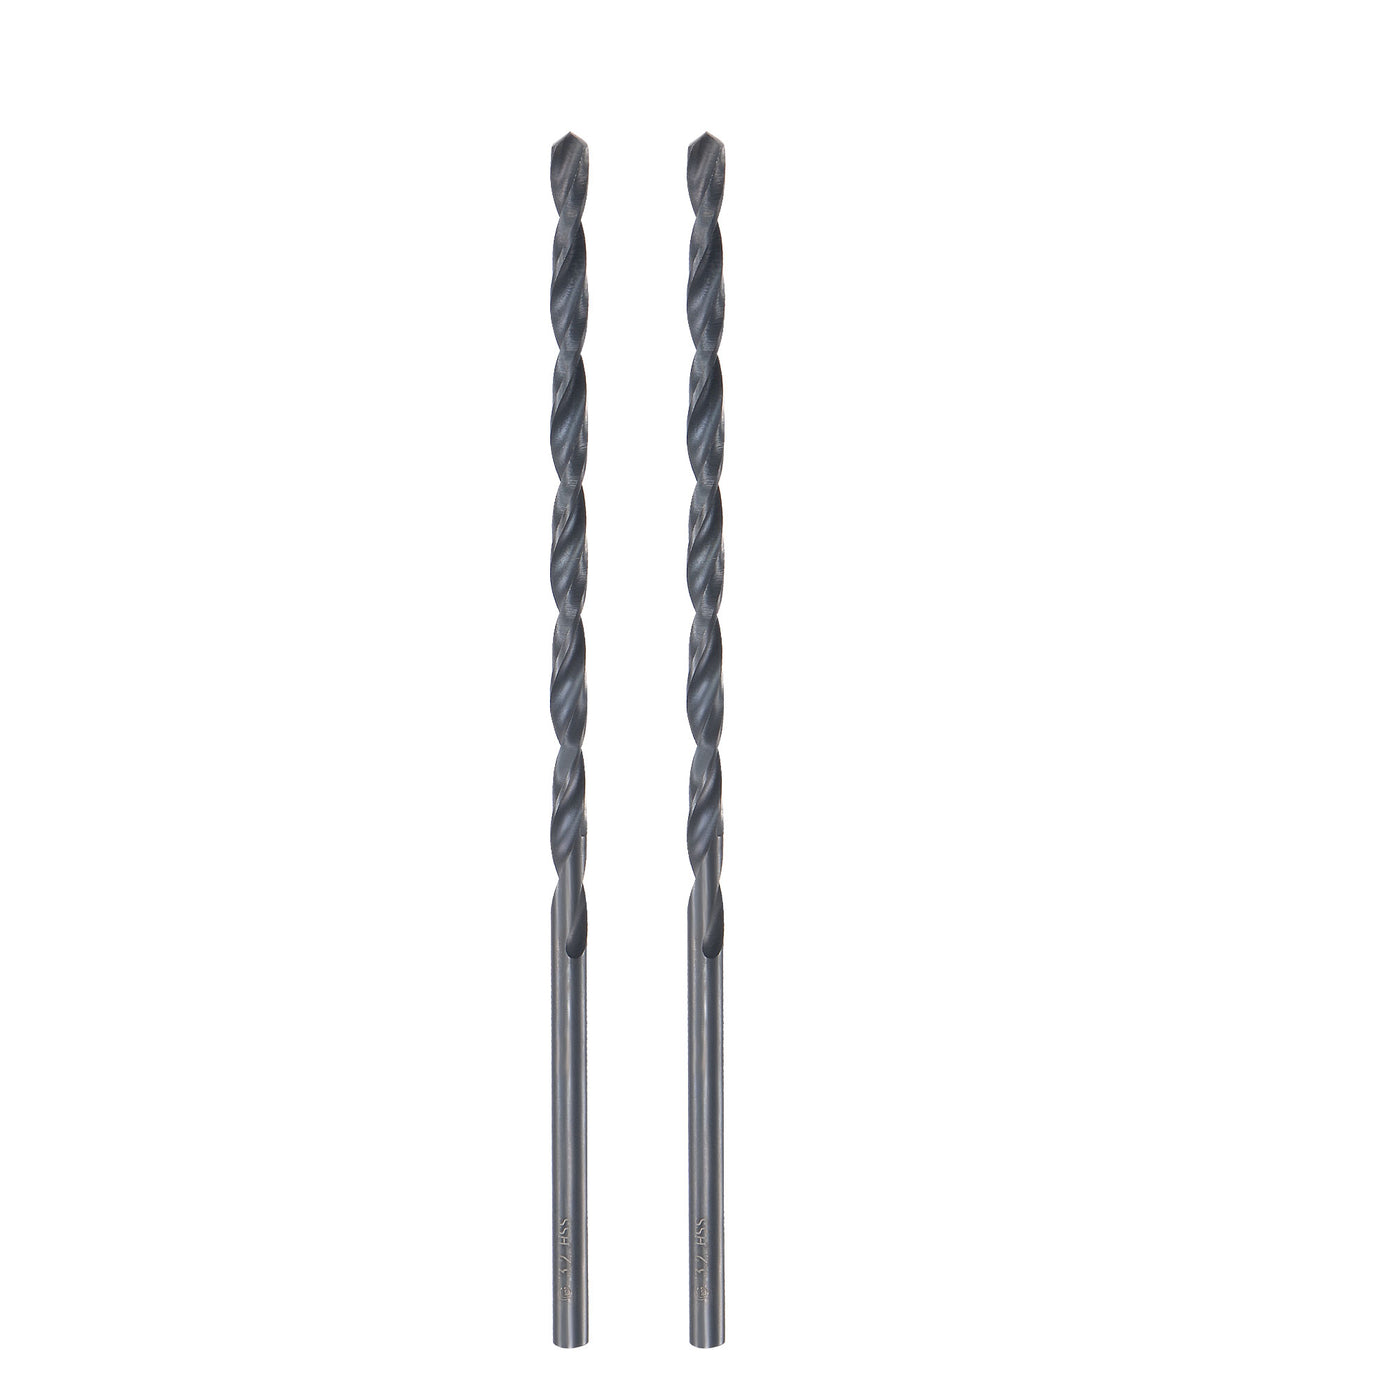 uxcell Uxcell High Speed Steel Lengthen Twist Drill Bit 3.2mm Fully Ground Black Oxide 2Pcs